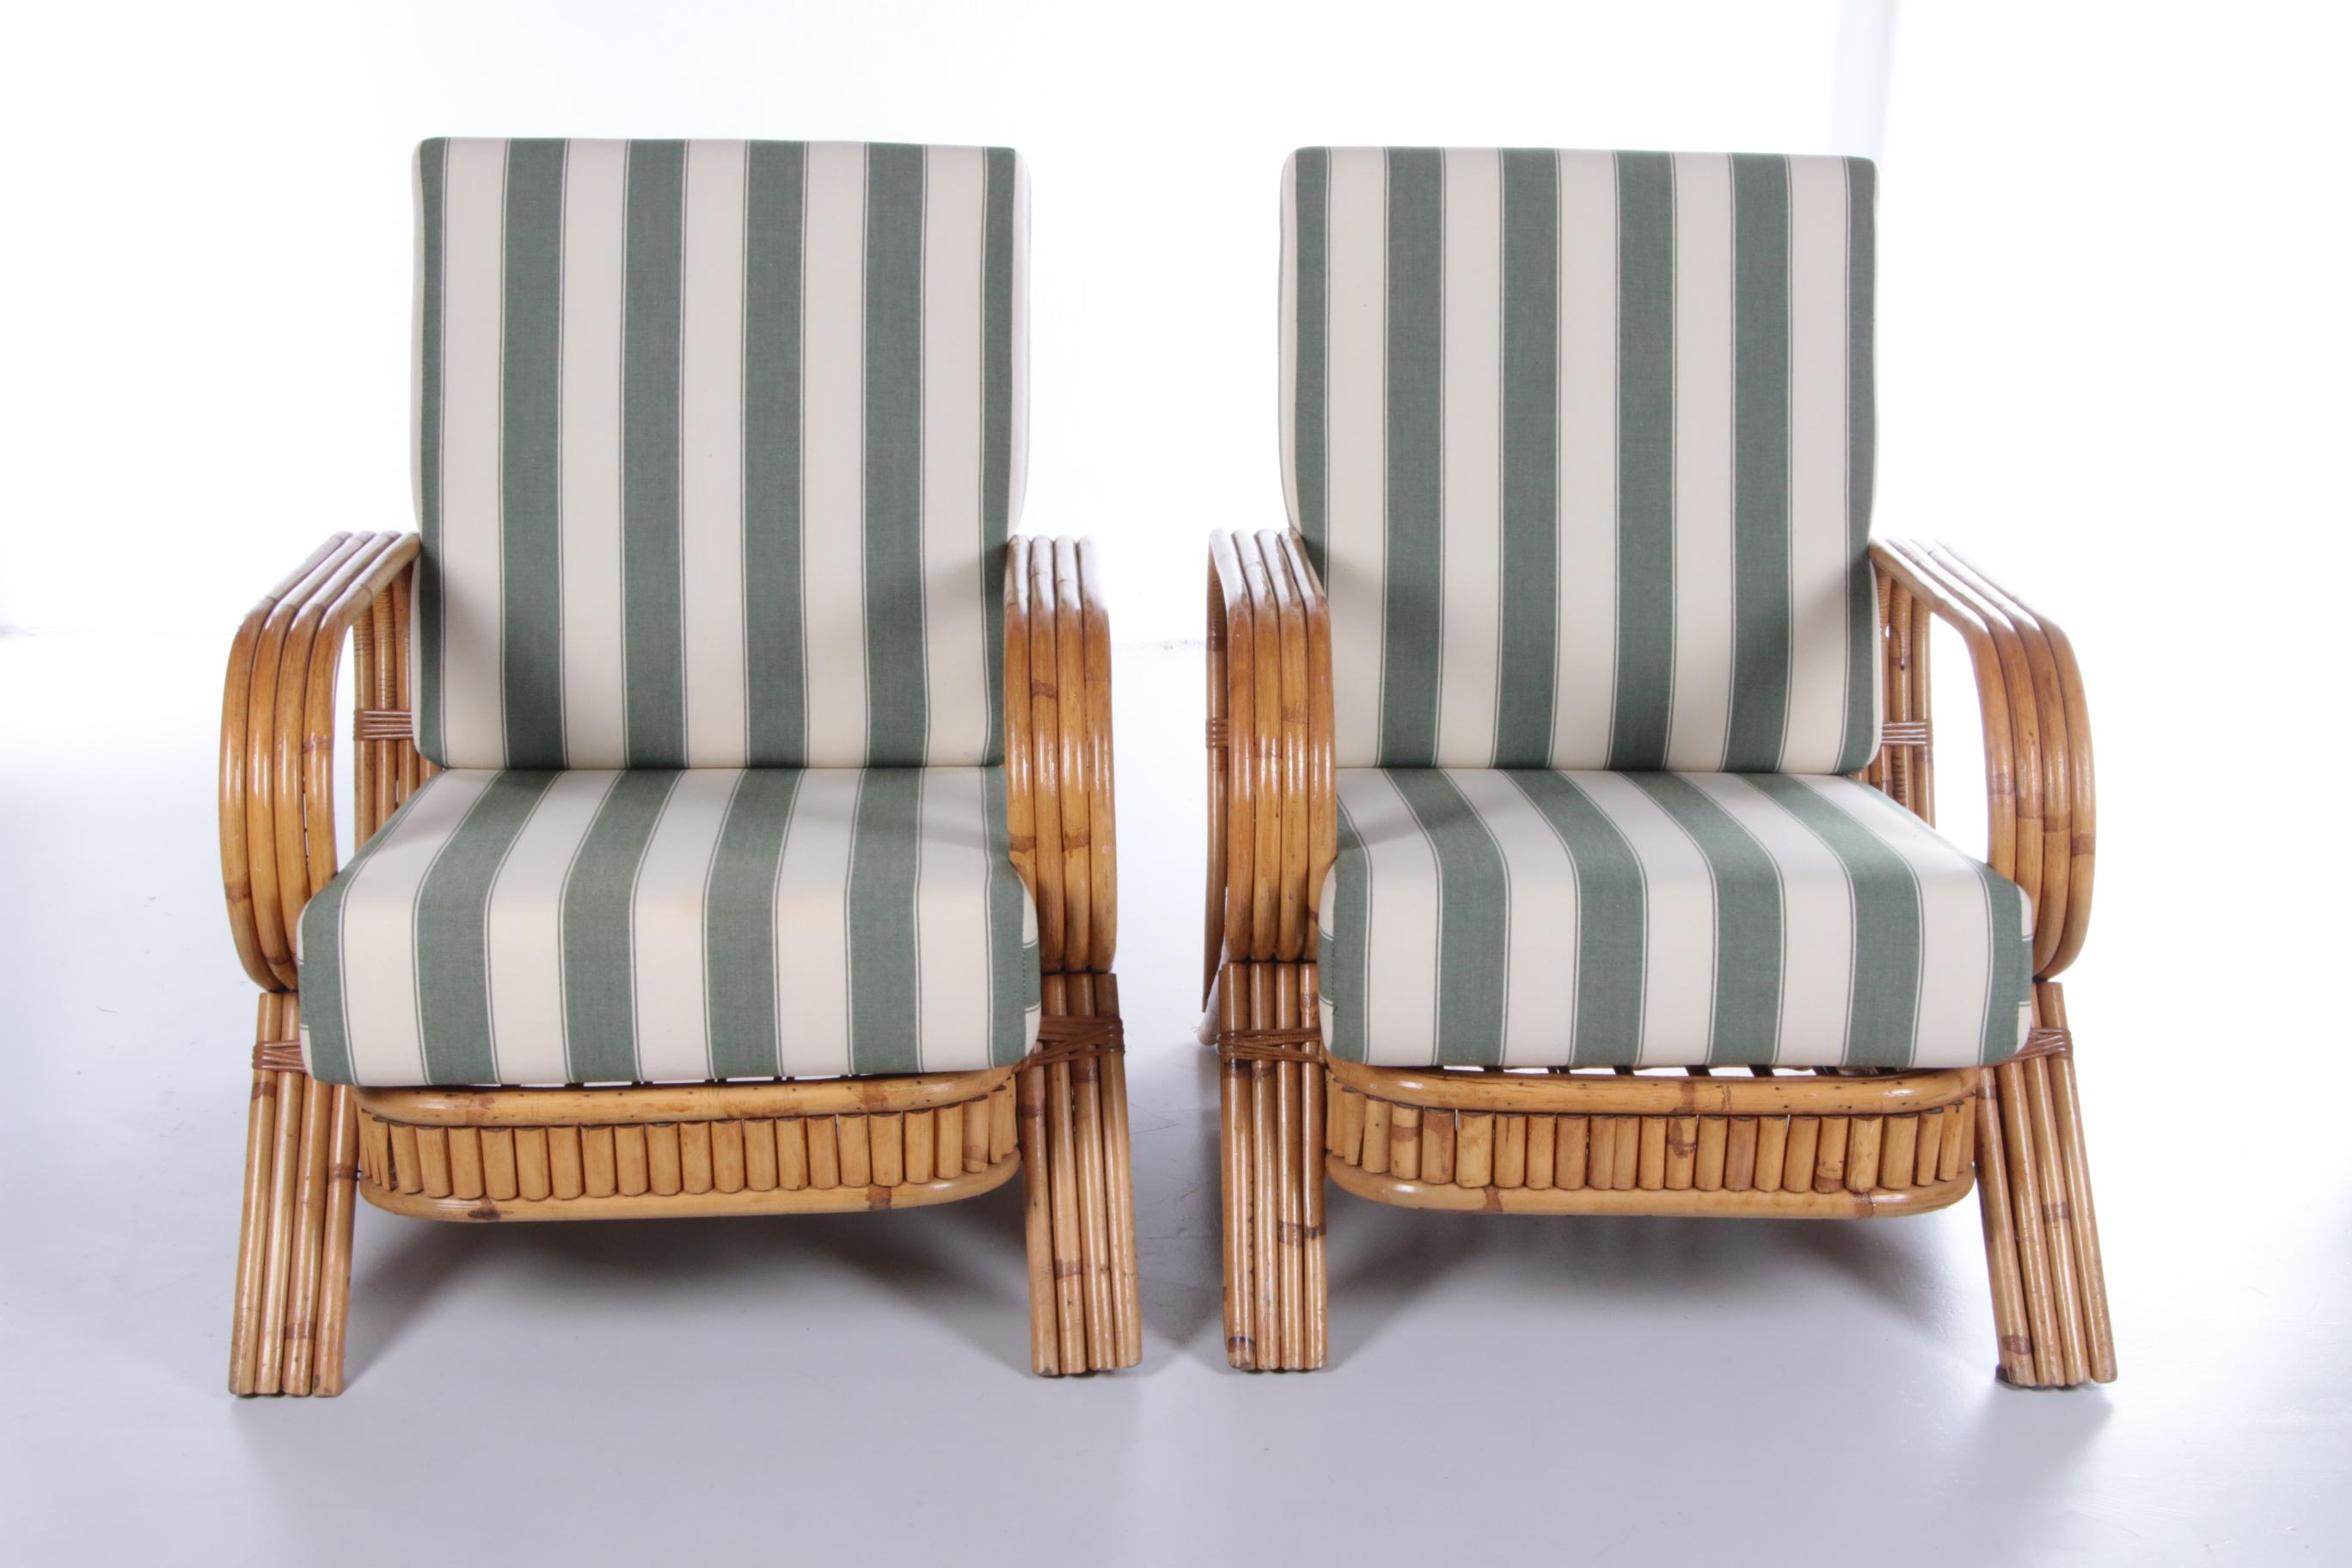 This beautiful set of bamboo armchairs is by Paul Frankl. The chairs were produced in France around the 1960s.

The chairs have a solid bamboo frame. The cushions feature the original green and cream striped fabric. 

The combination of the colours